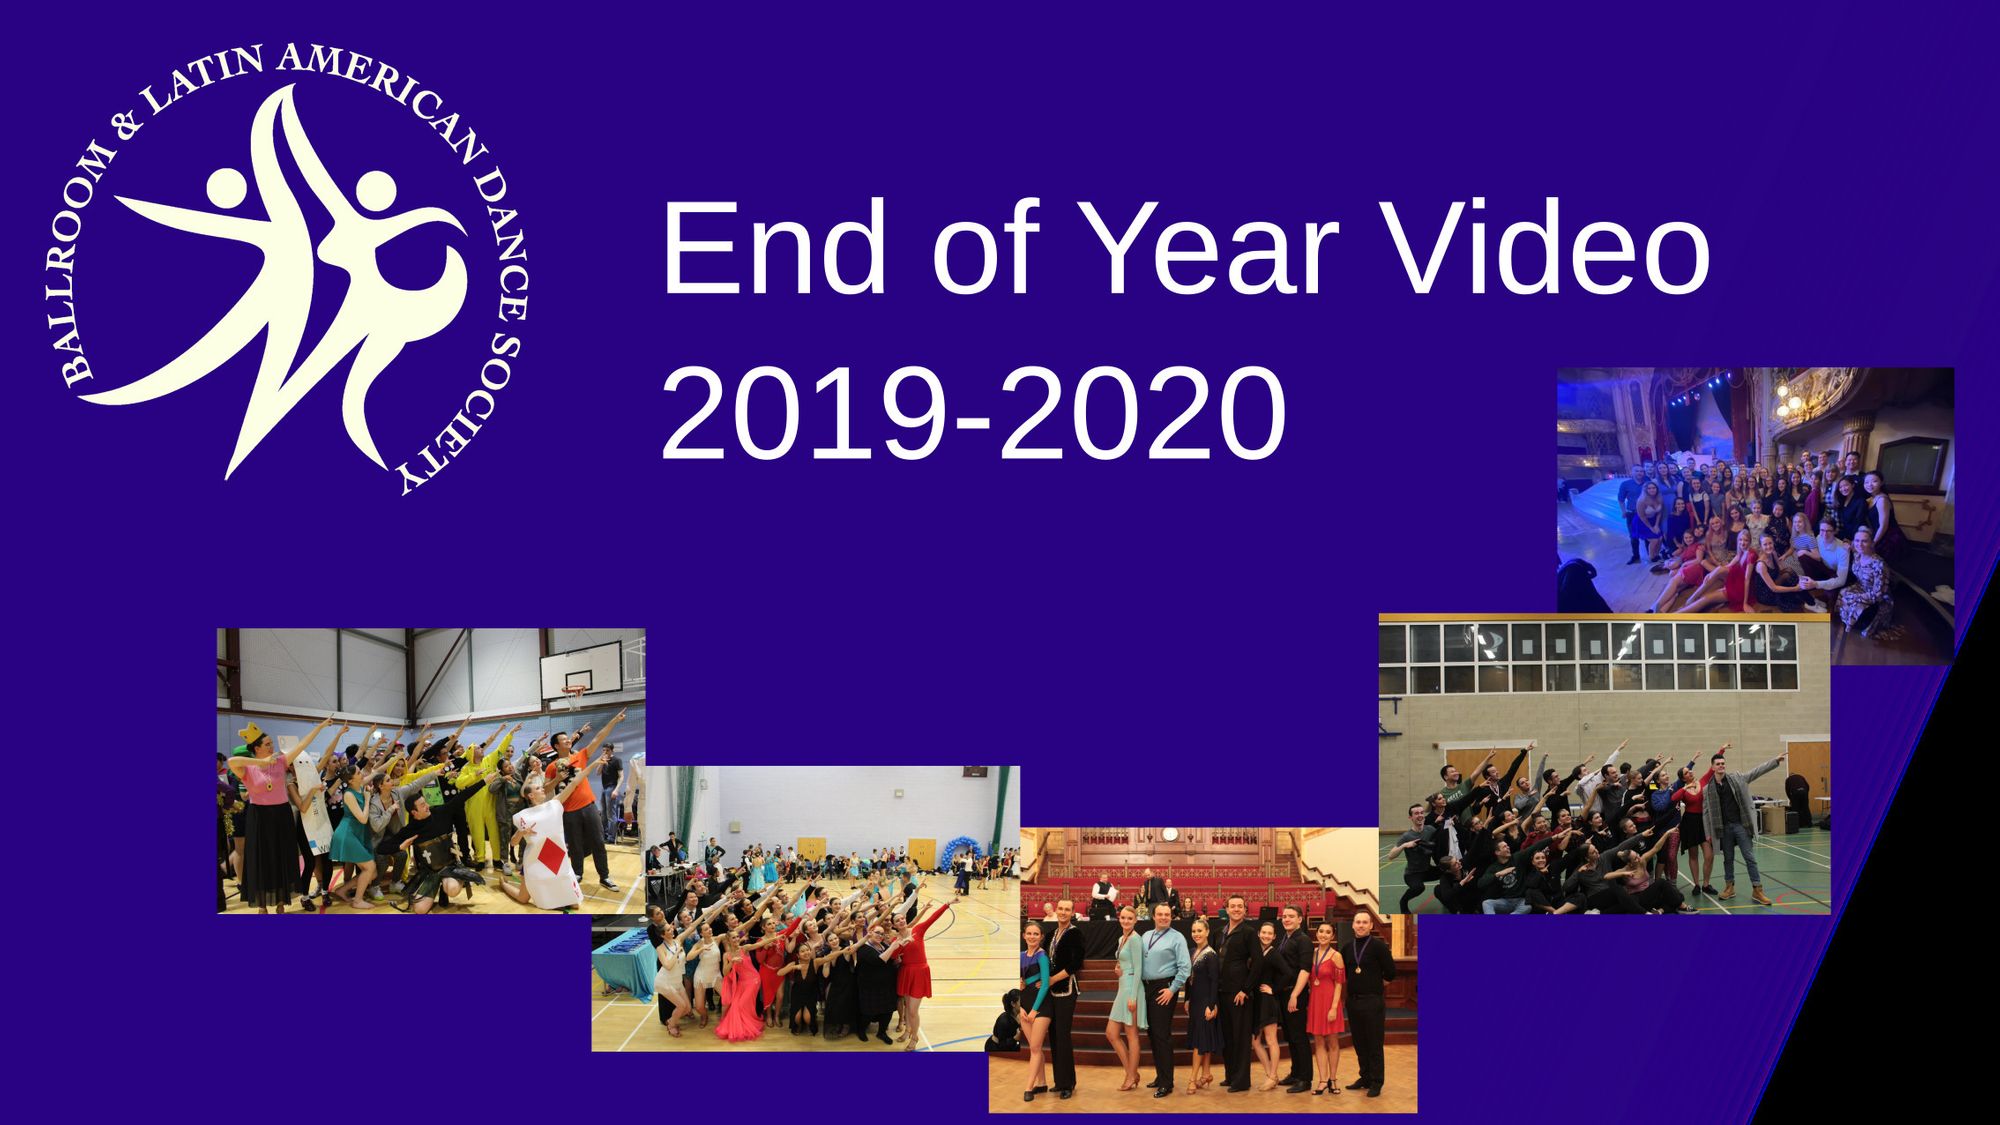 End of Year Video 2019-2020